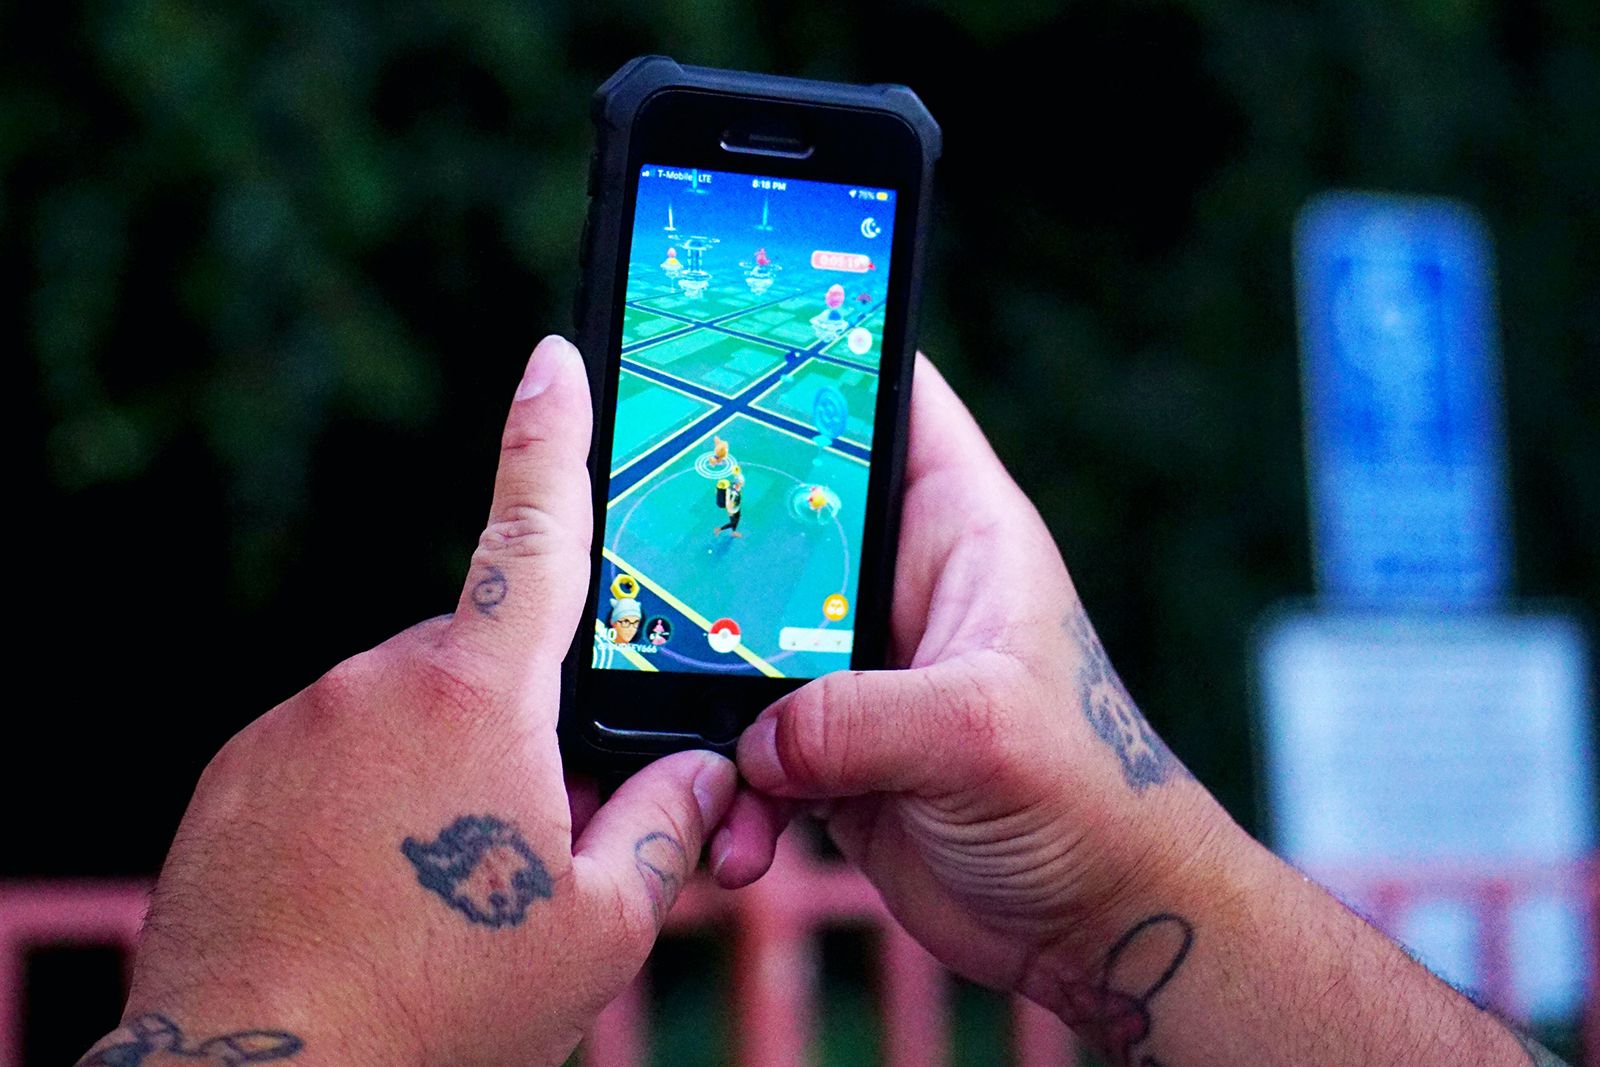 Tattooed hands hold a smartphone with Pokemon Go